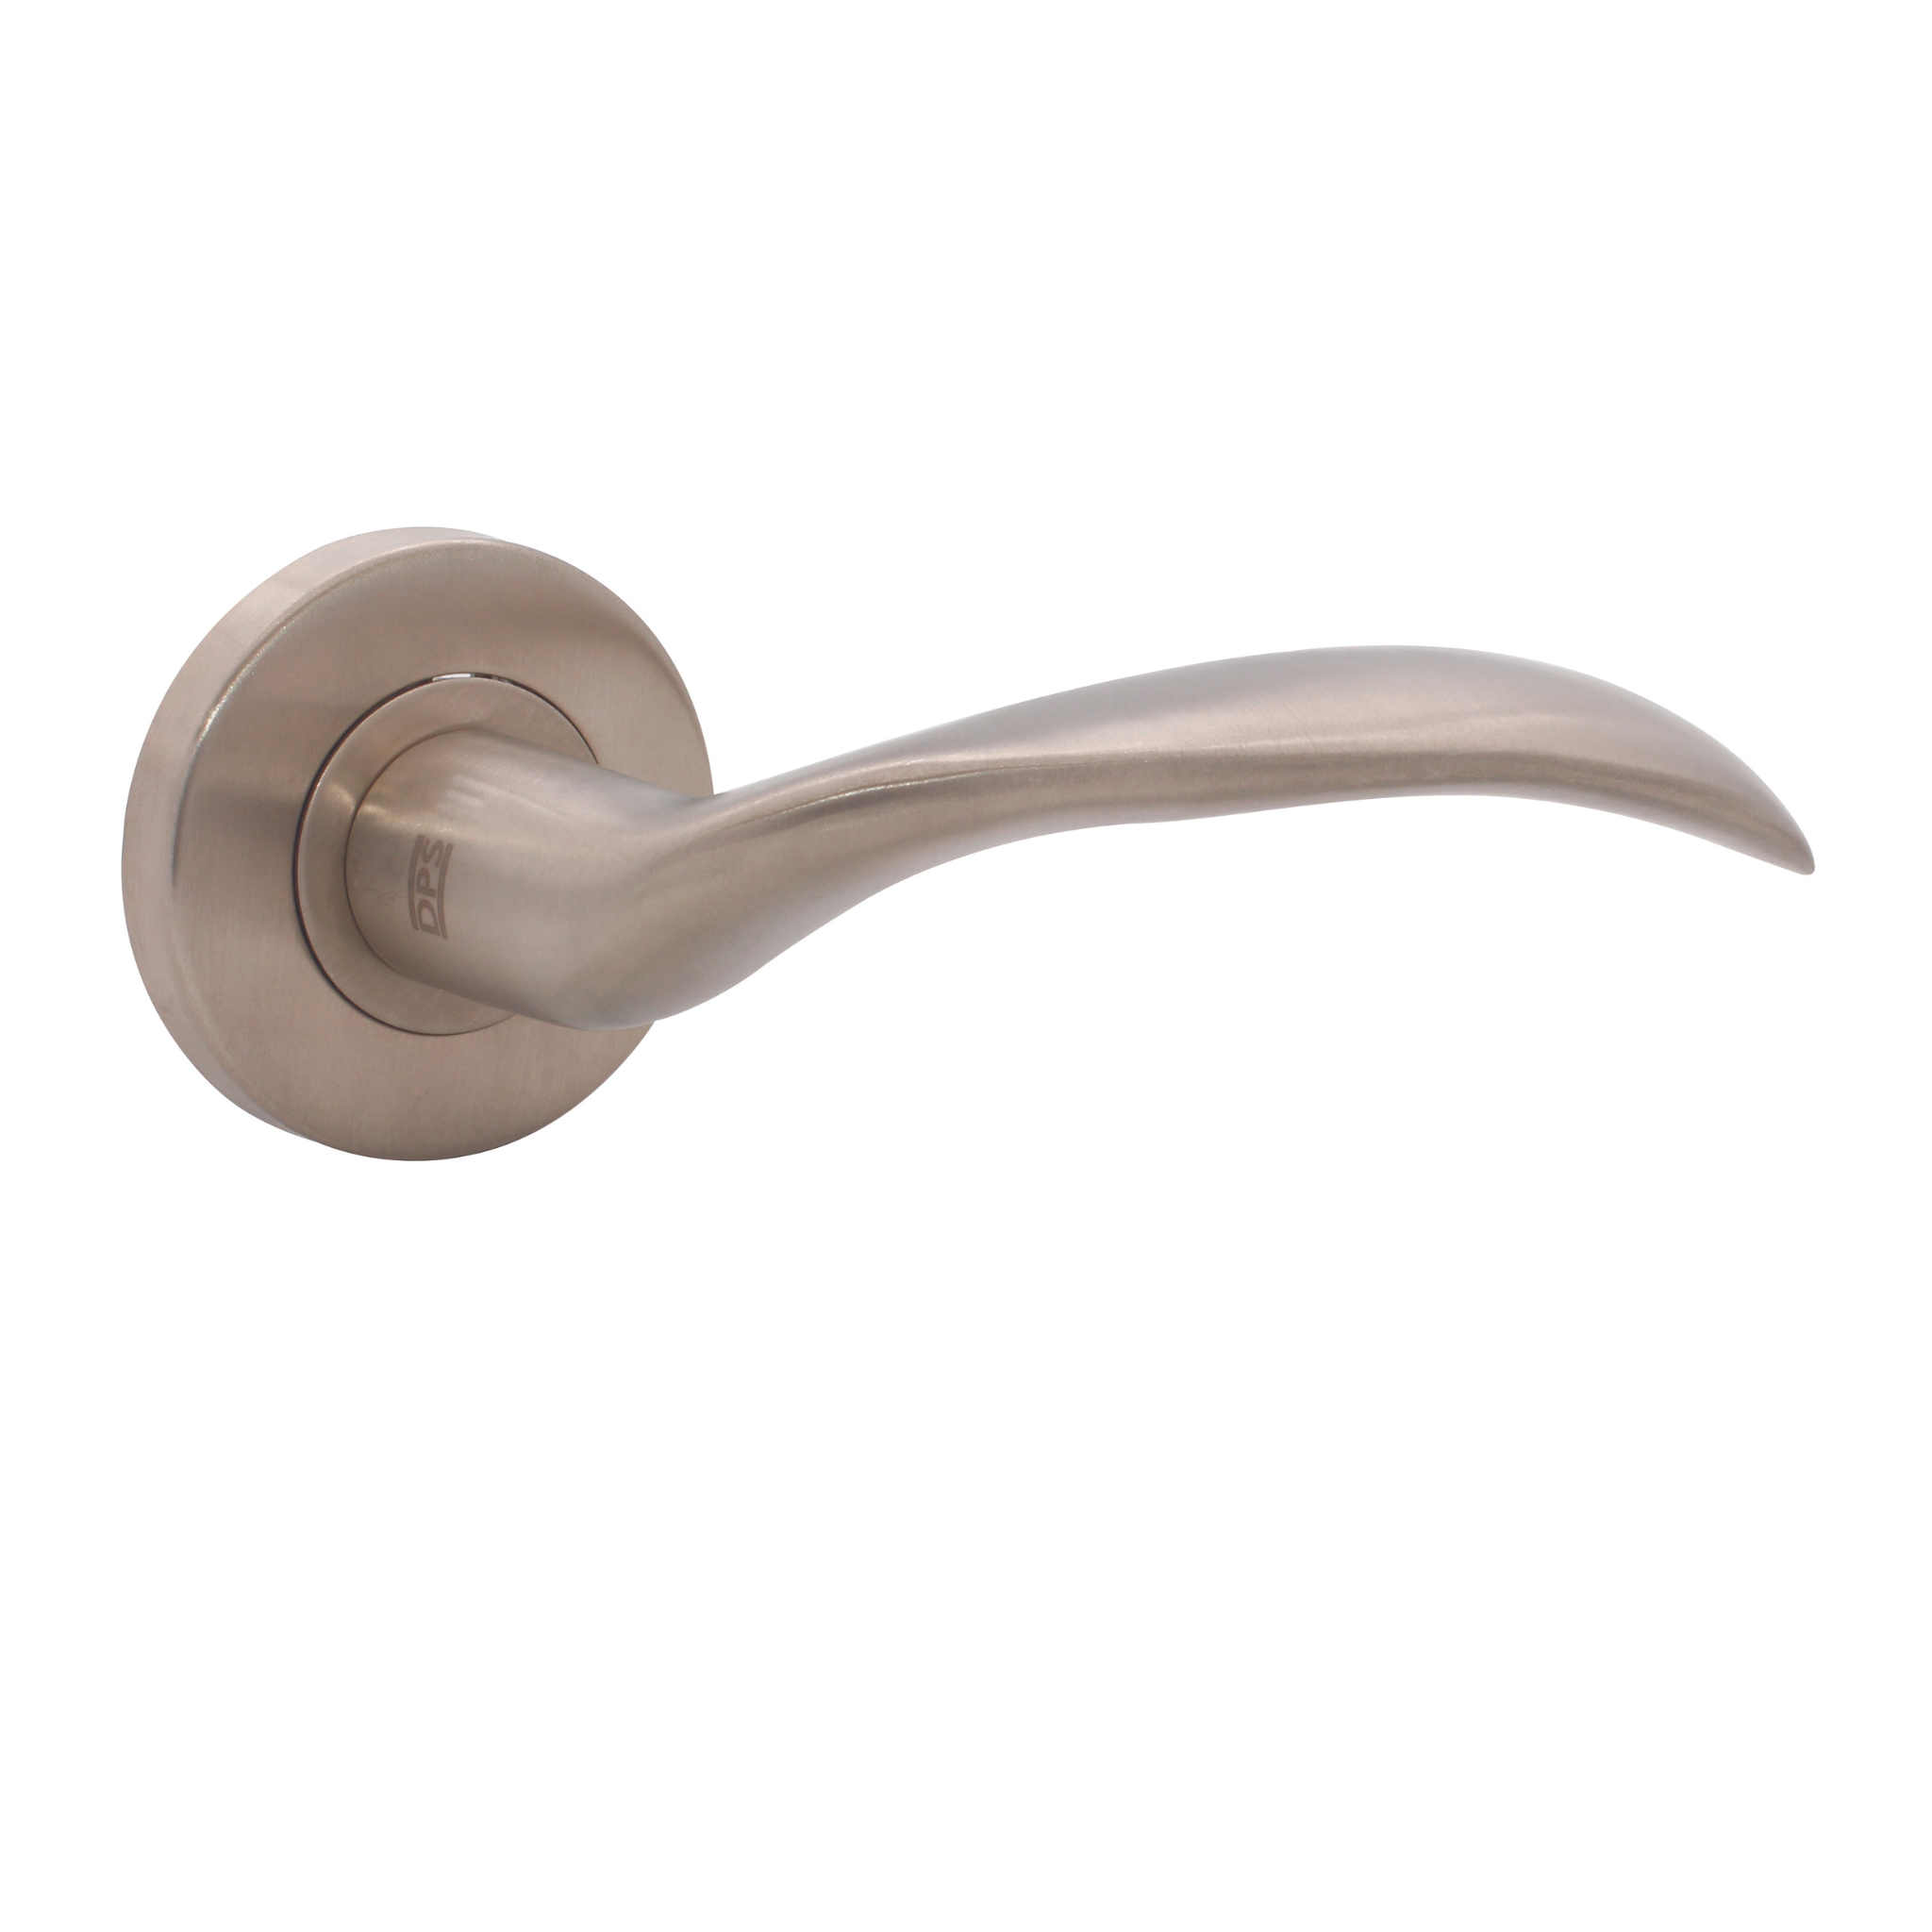 FS101.R._.SS, Lever Handles, Solid, On Round Rose, With Escutcheons, 117mm (l), Stainless Steel, CISA